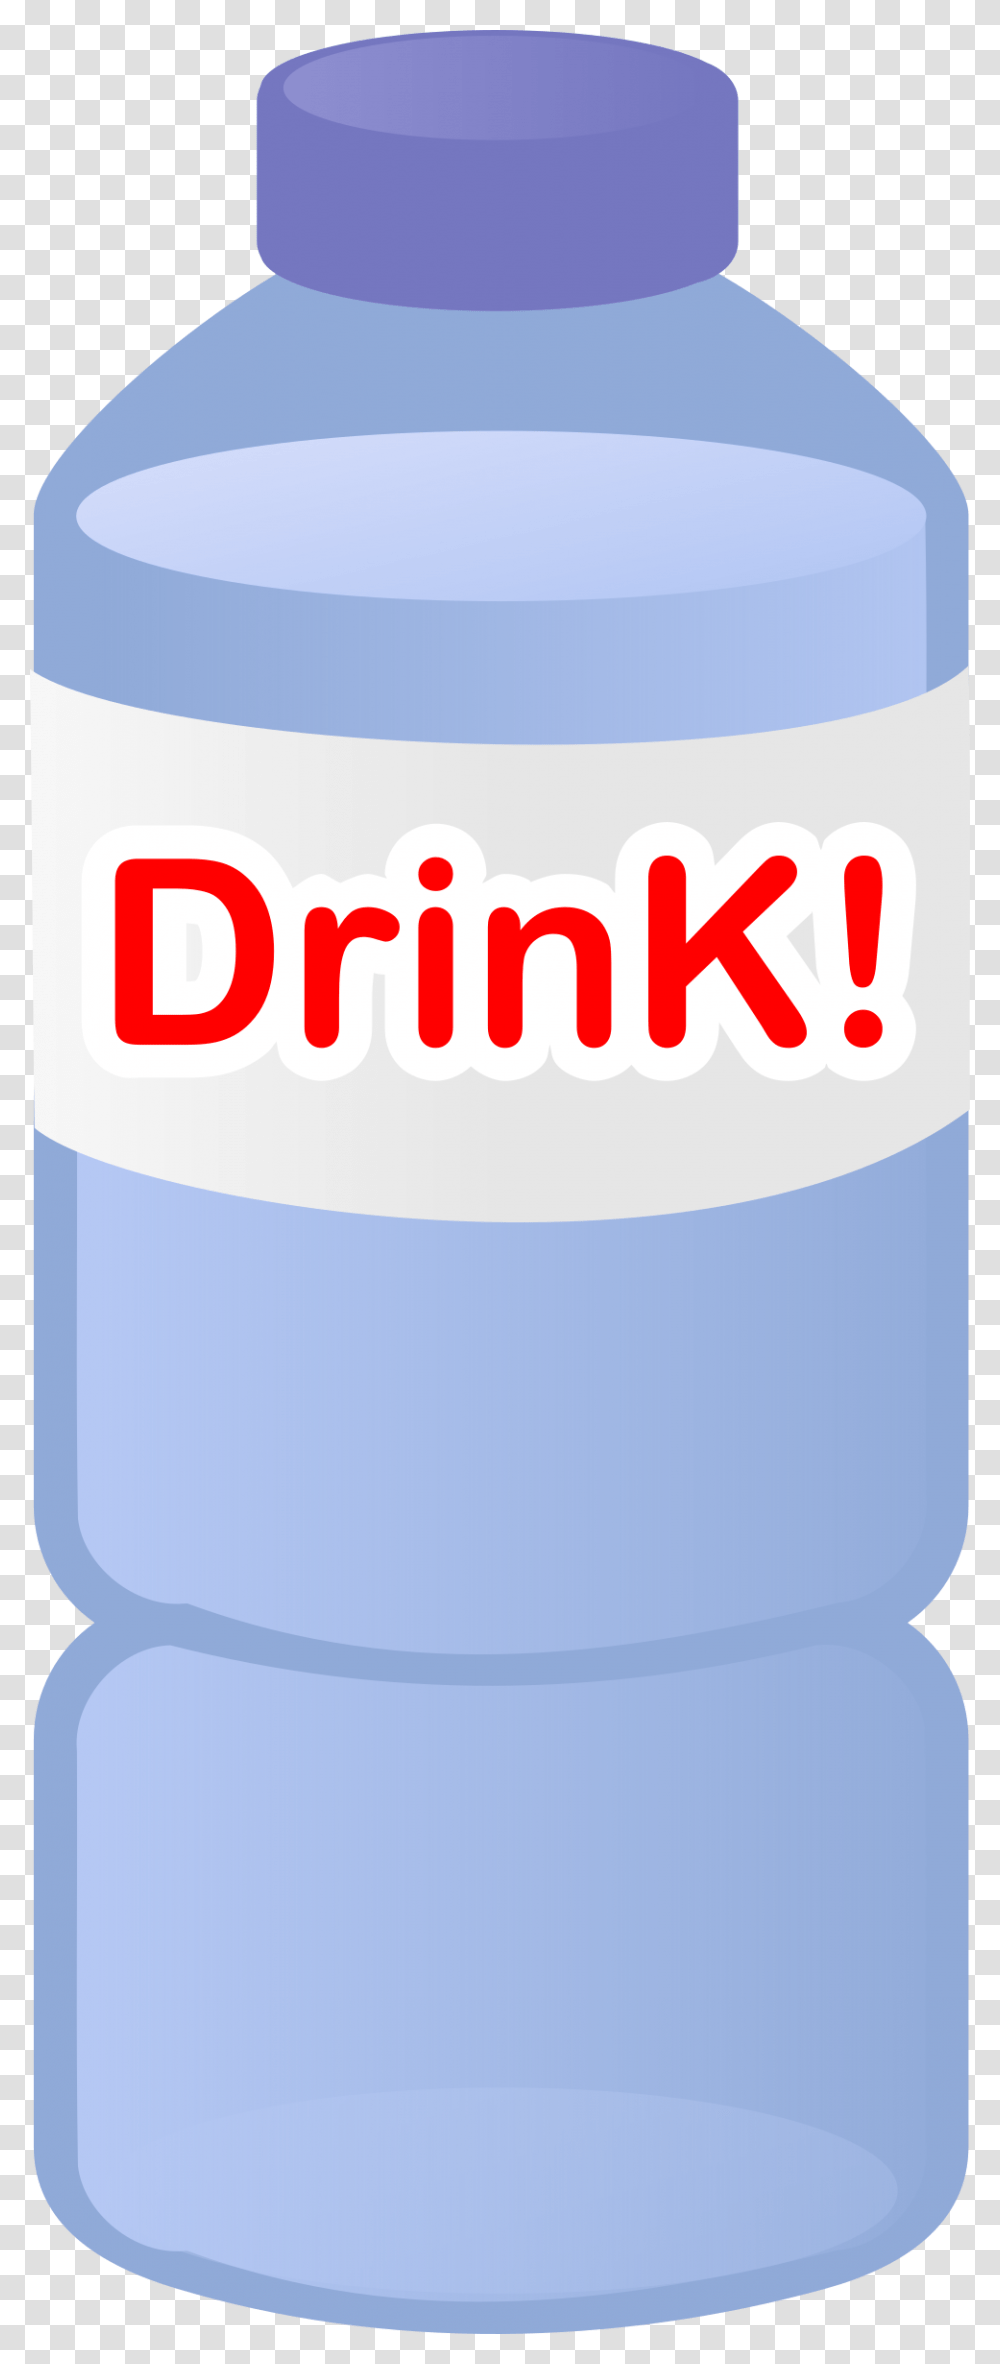 This Free Icons Design Of Small Water Bottle Free Clipart Of Water Bottle, Jar, Beverage, Food Transparent Png